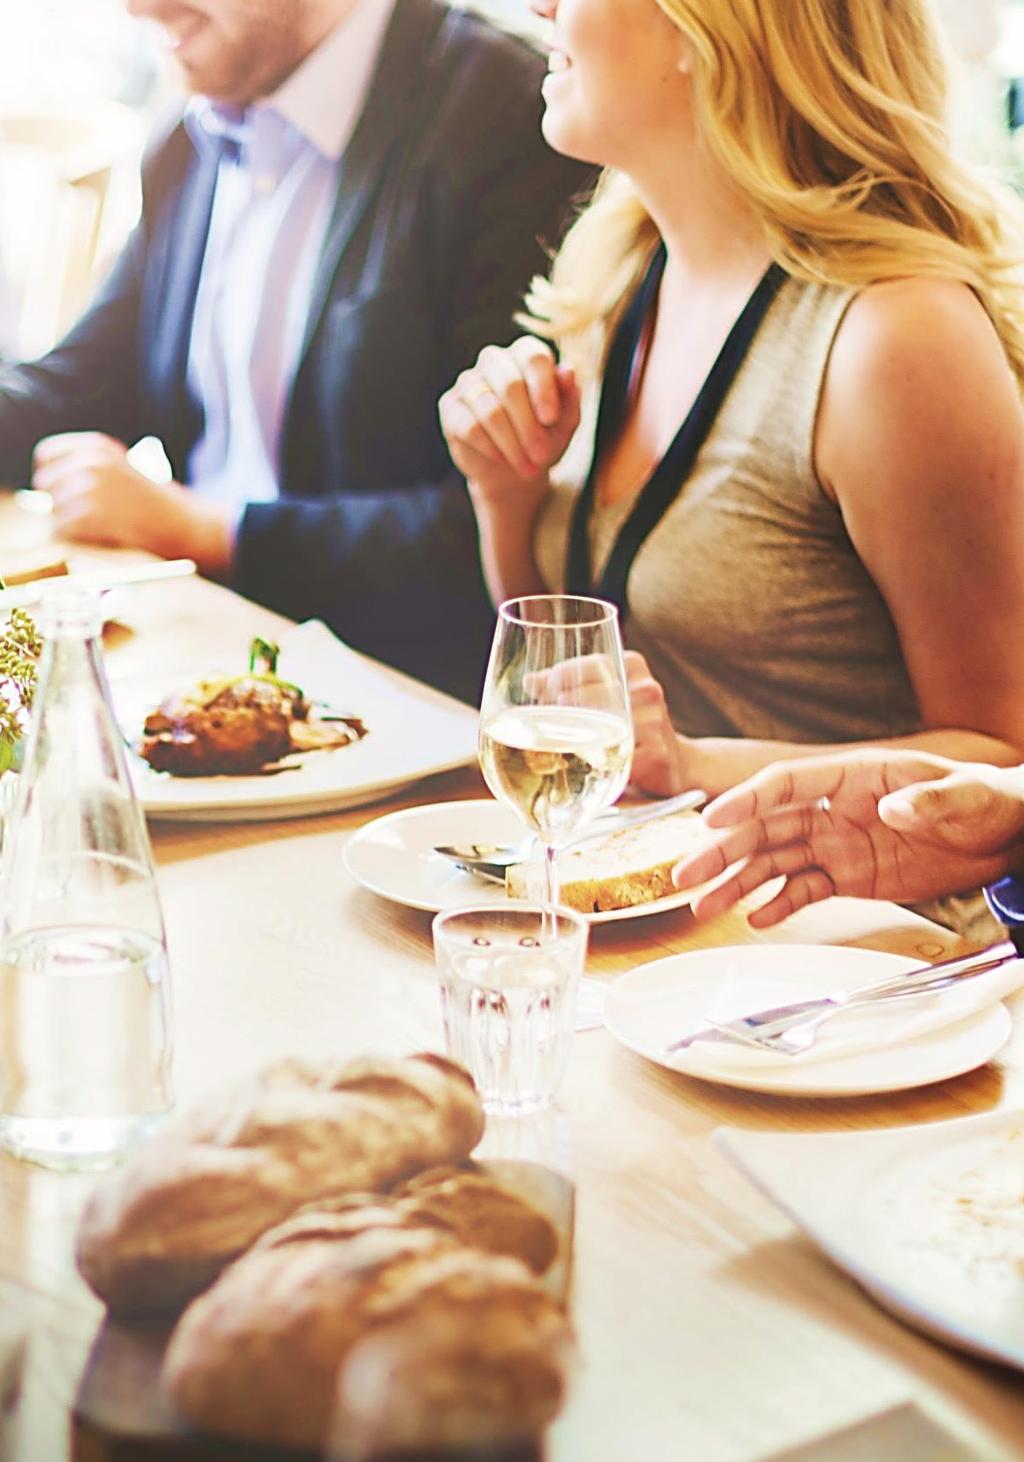 POWER BUSINESS DINING Whether you are building relationships or closing the deal, use these tips for successful business dining meetings.